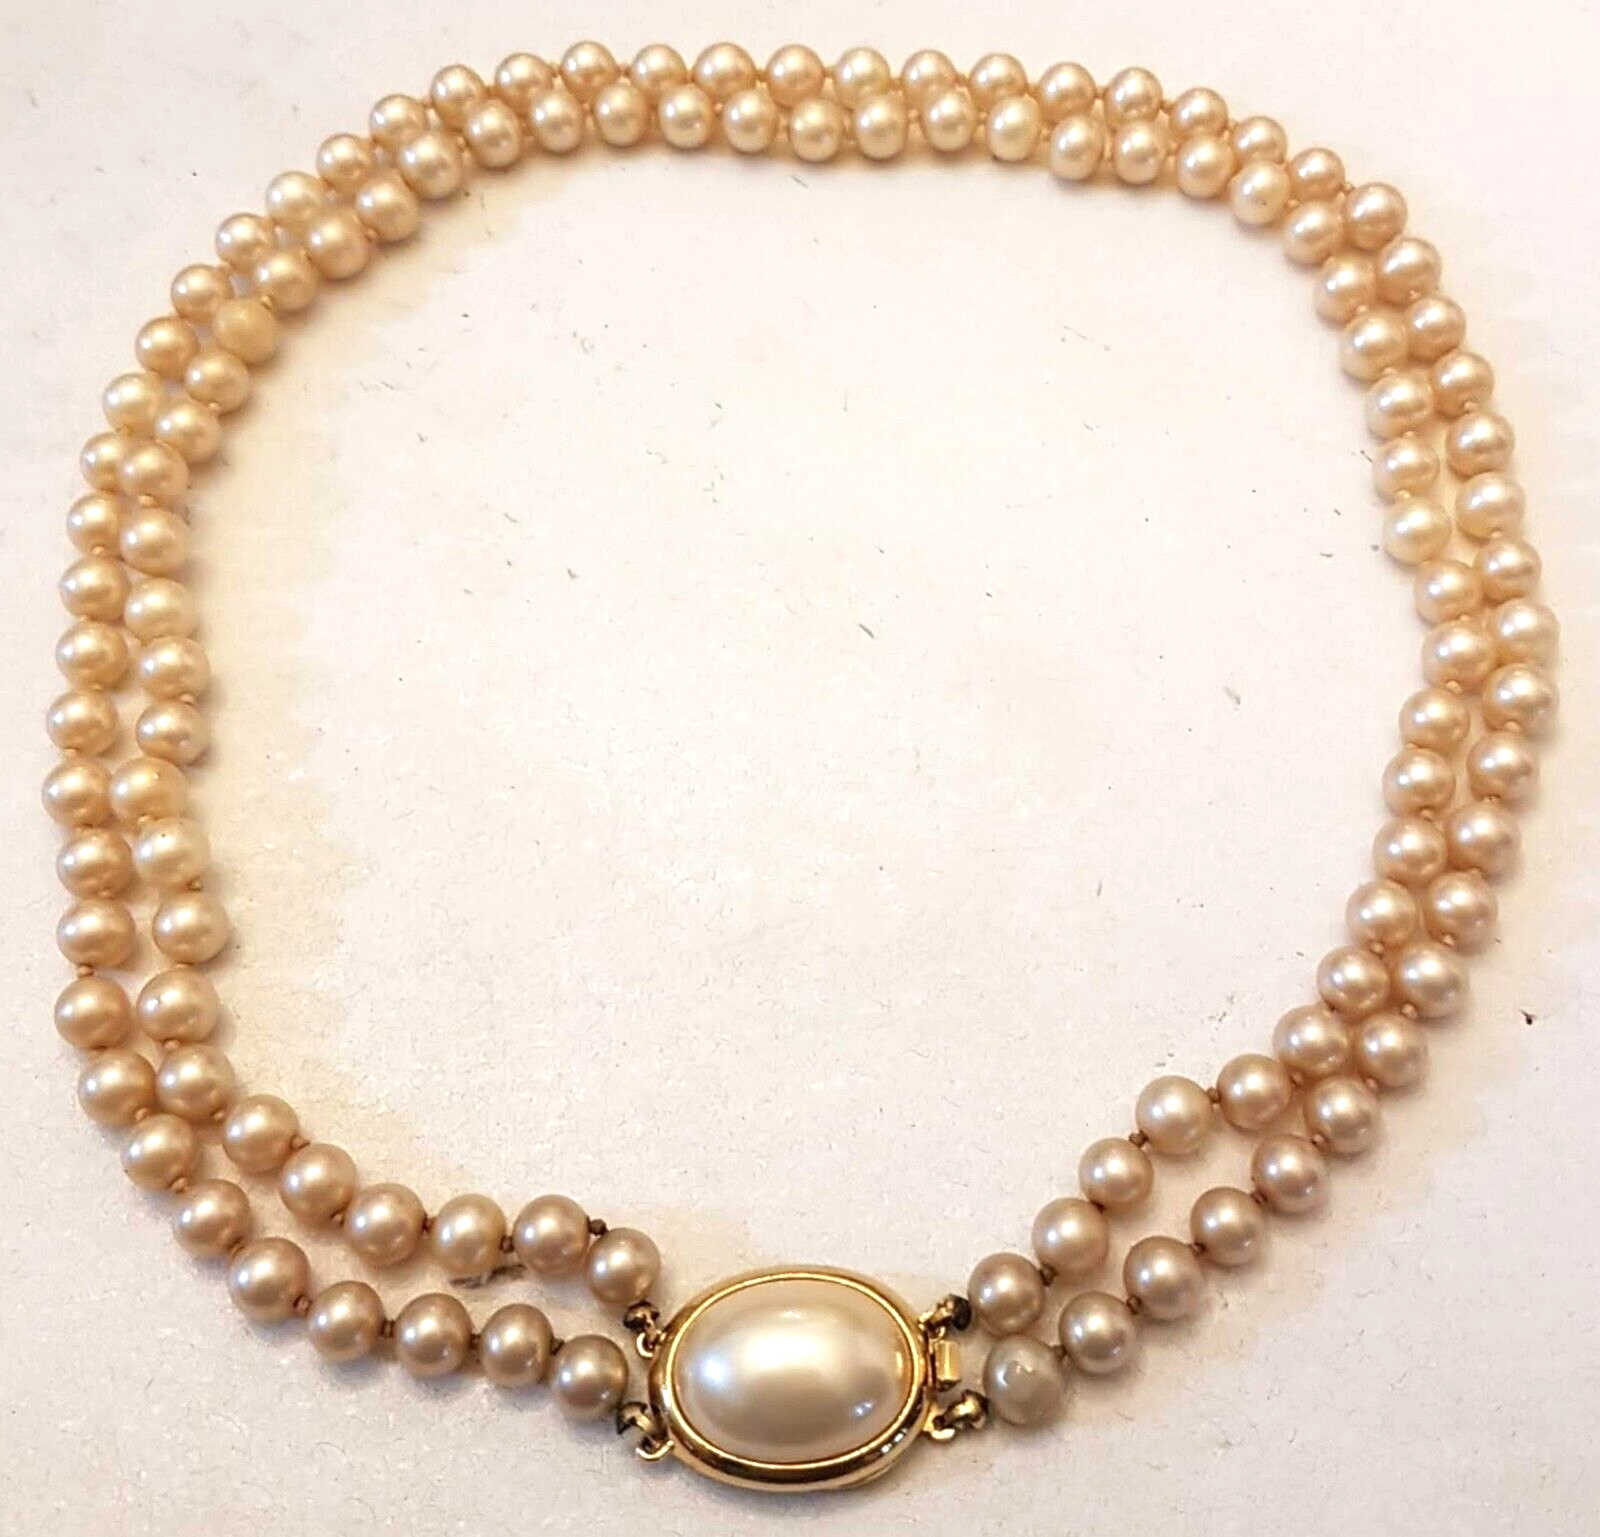 Primary image for Crown Trifari VTG Faux Pearl Necklace 6mm Knotted Beads 16" Double Strand Choker